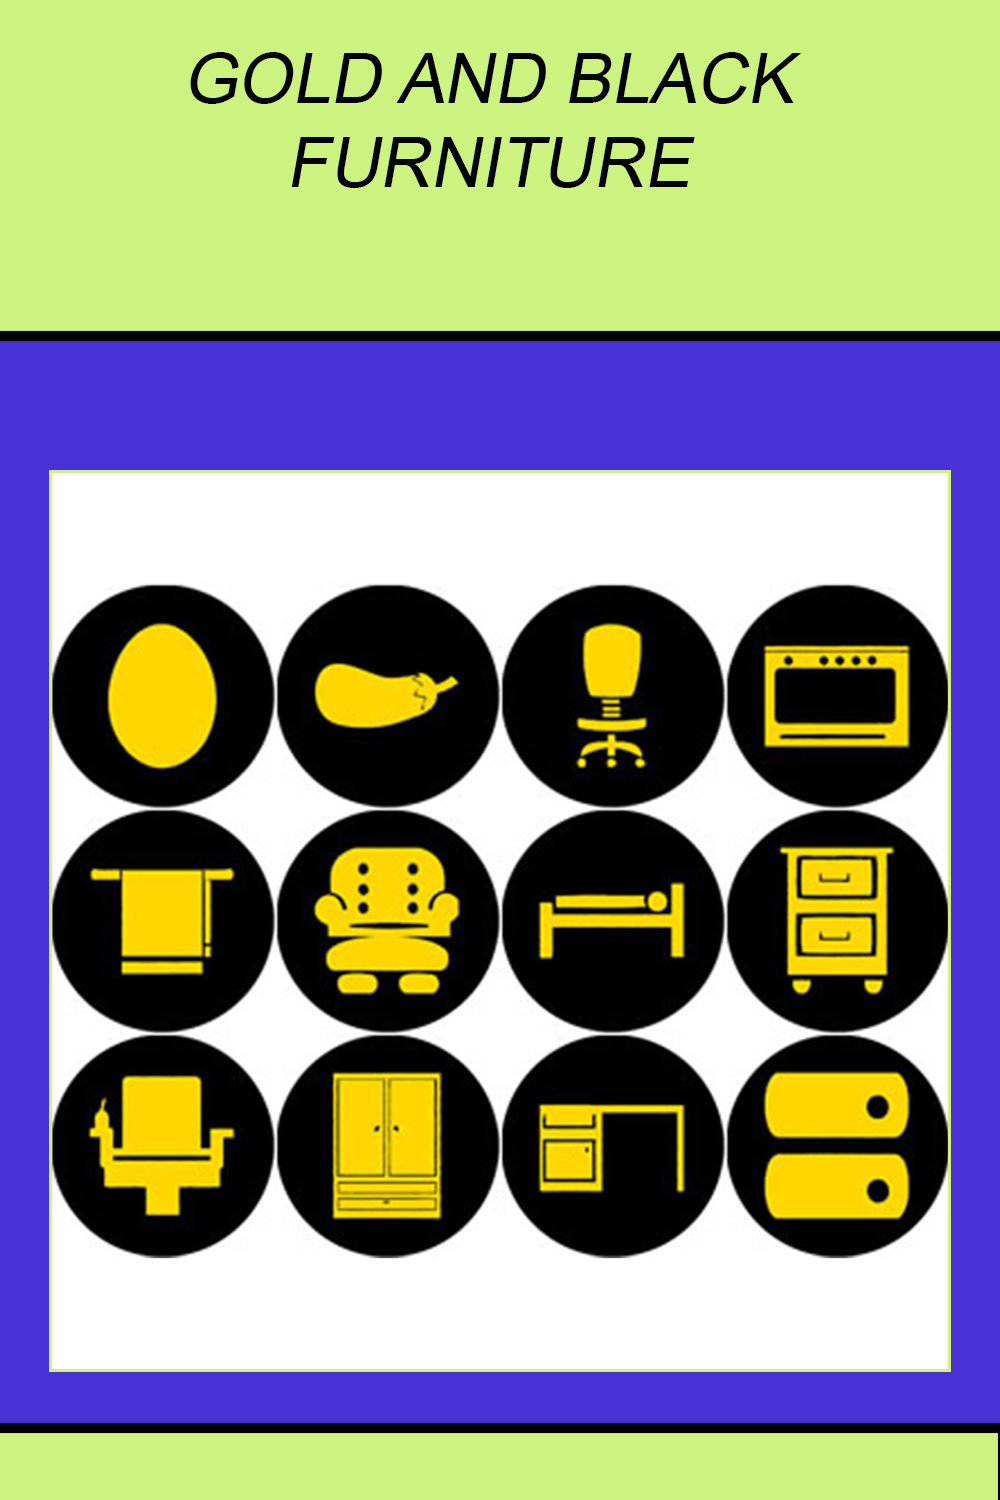 GOLD AND BLACK FURNITURE ROUND ICONS pinterest preview image.